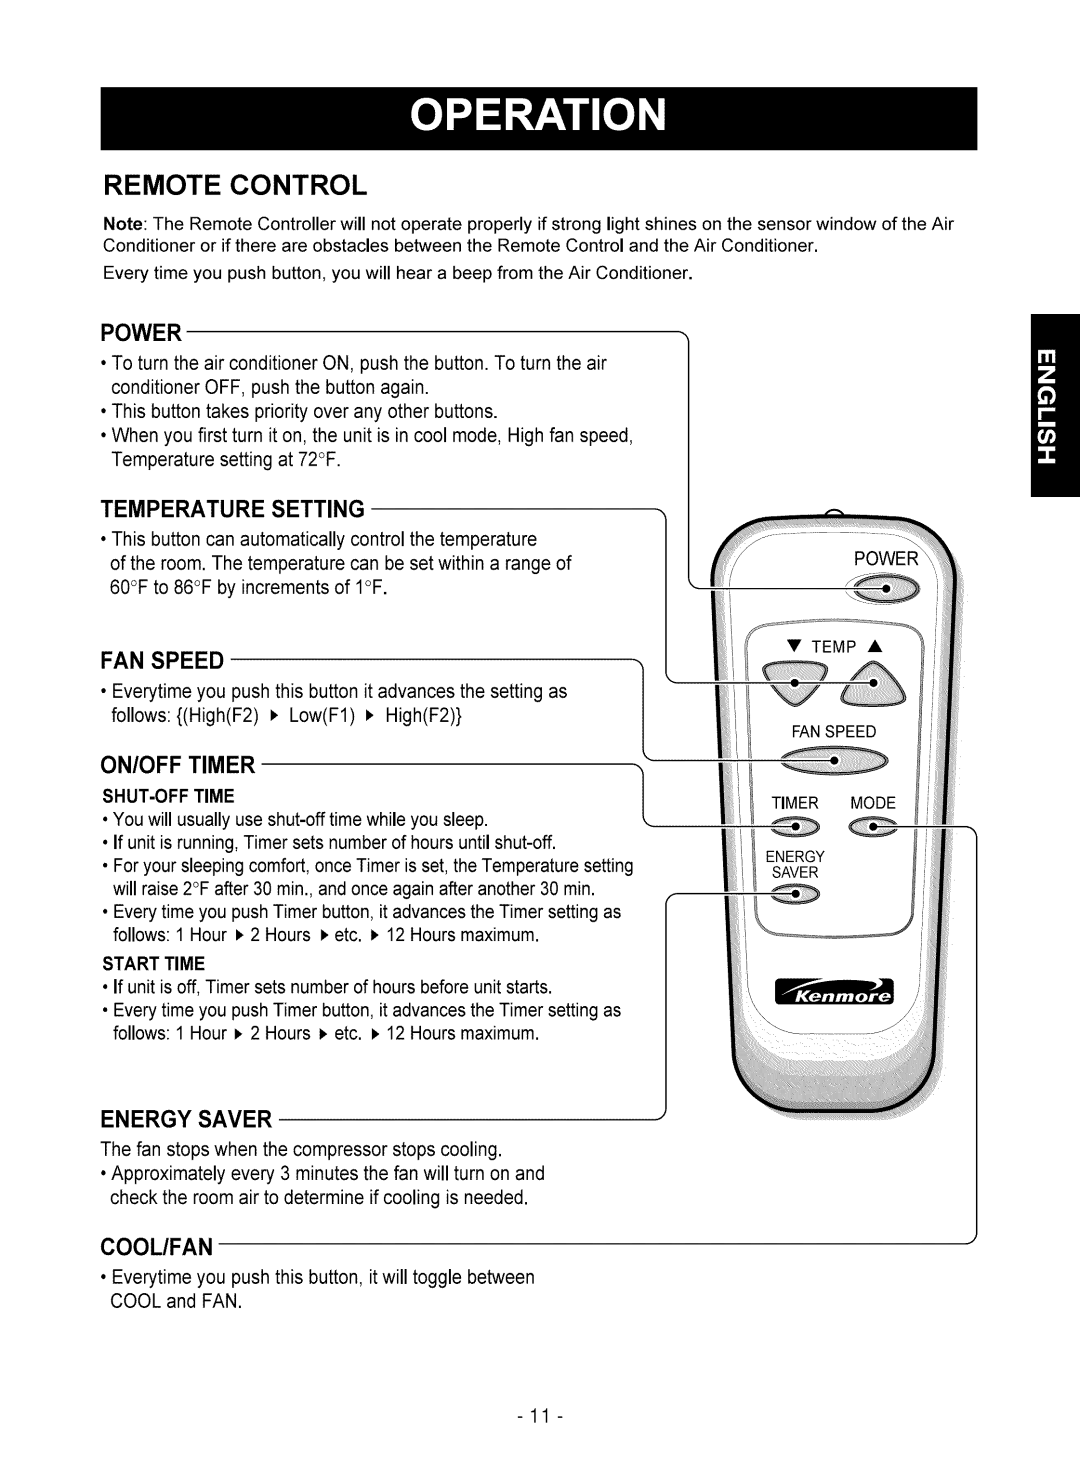 Kenmore 580.75051 owner manual Remote Control, Power, Temperature Setting, Fan Speed, Energy Saver, Cool/Fan 